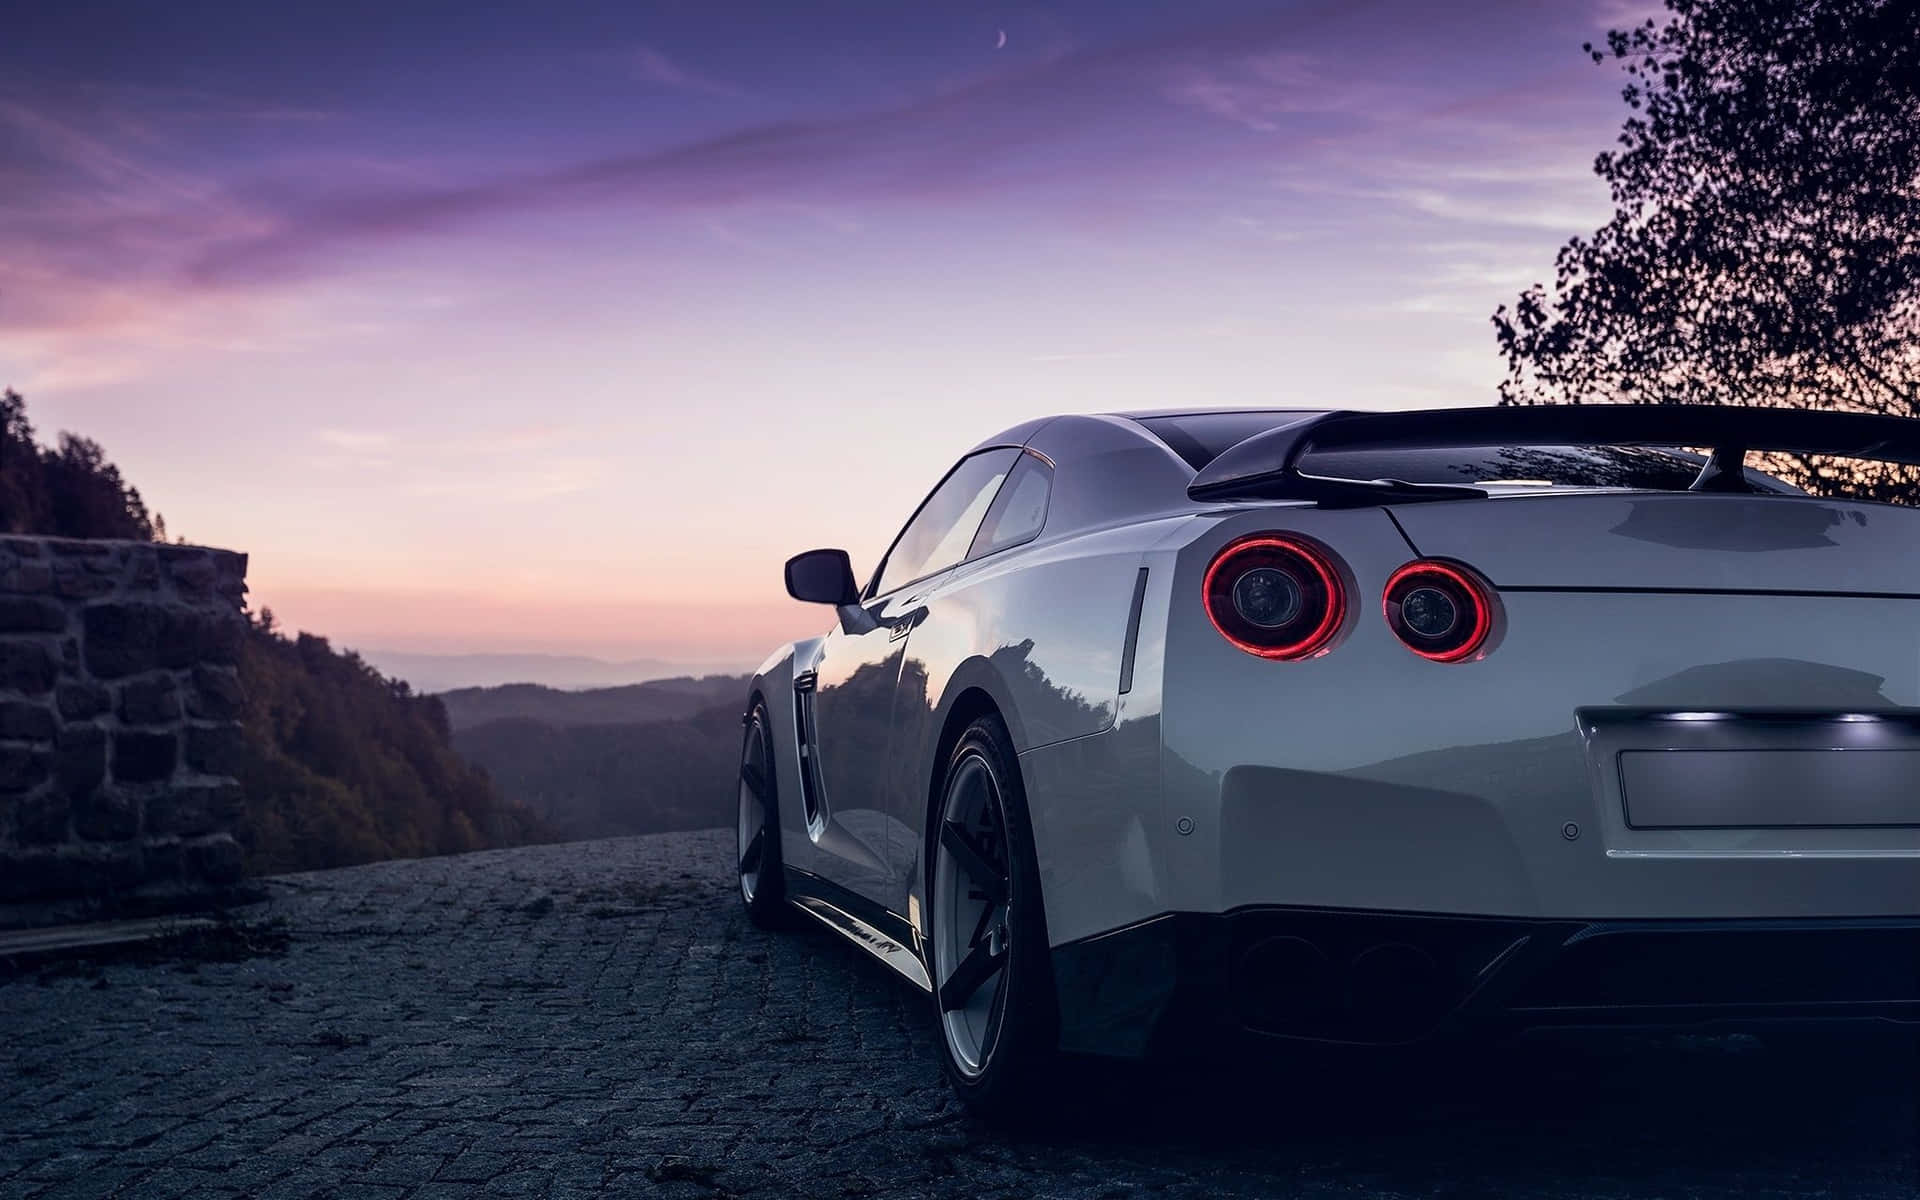 A White Sports Car Parked On A Road At Sunset